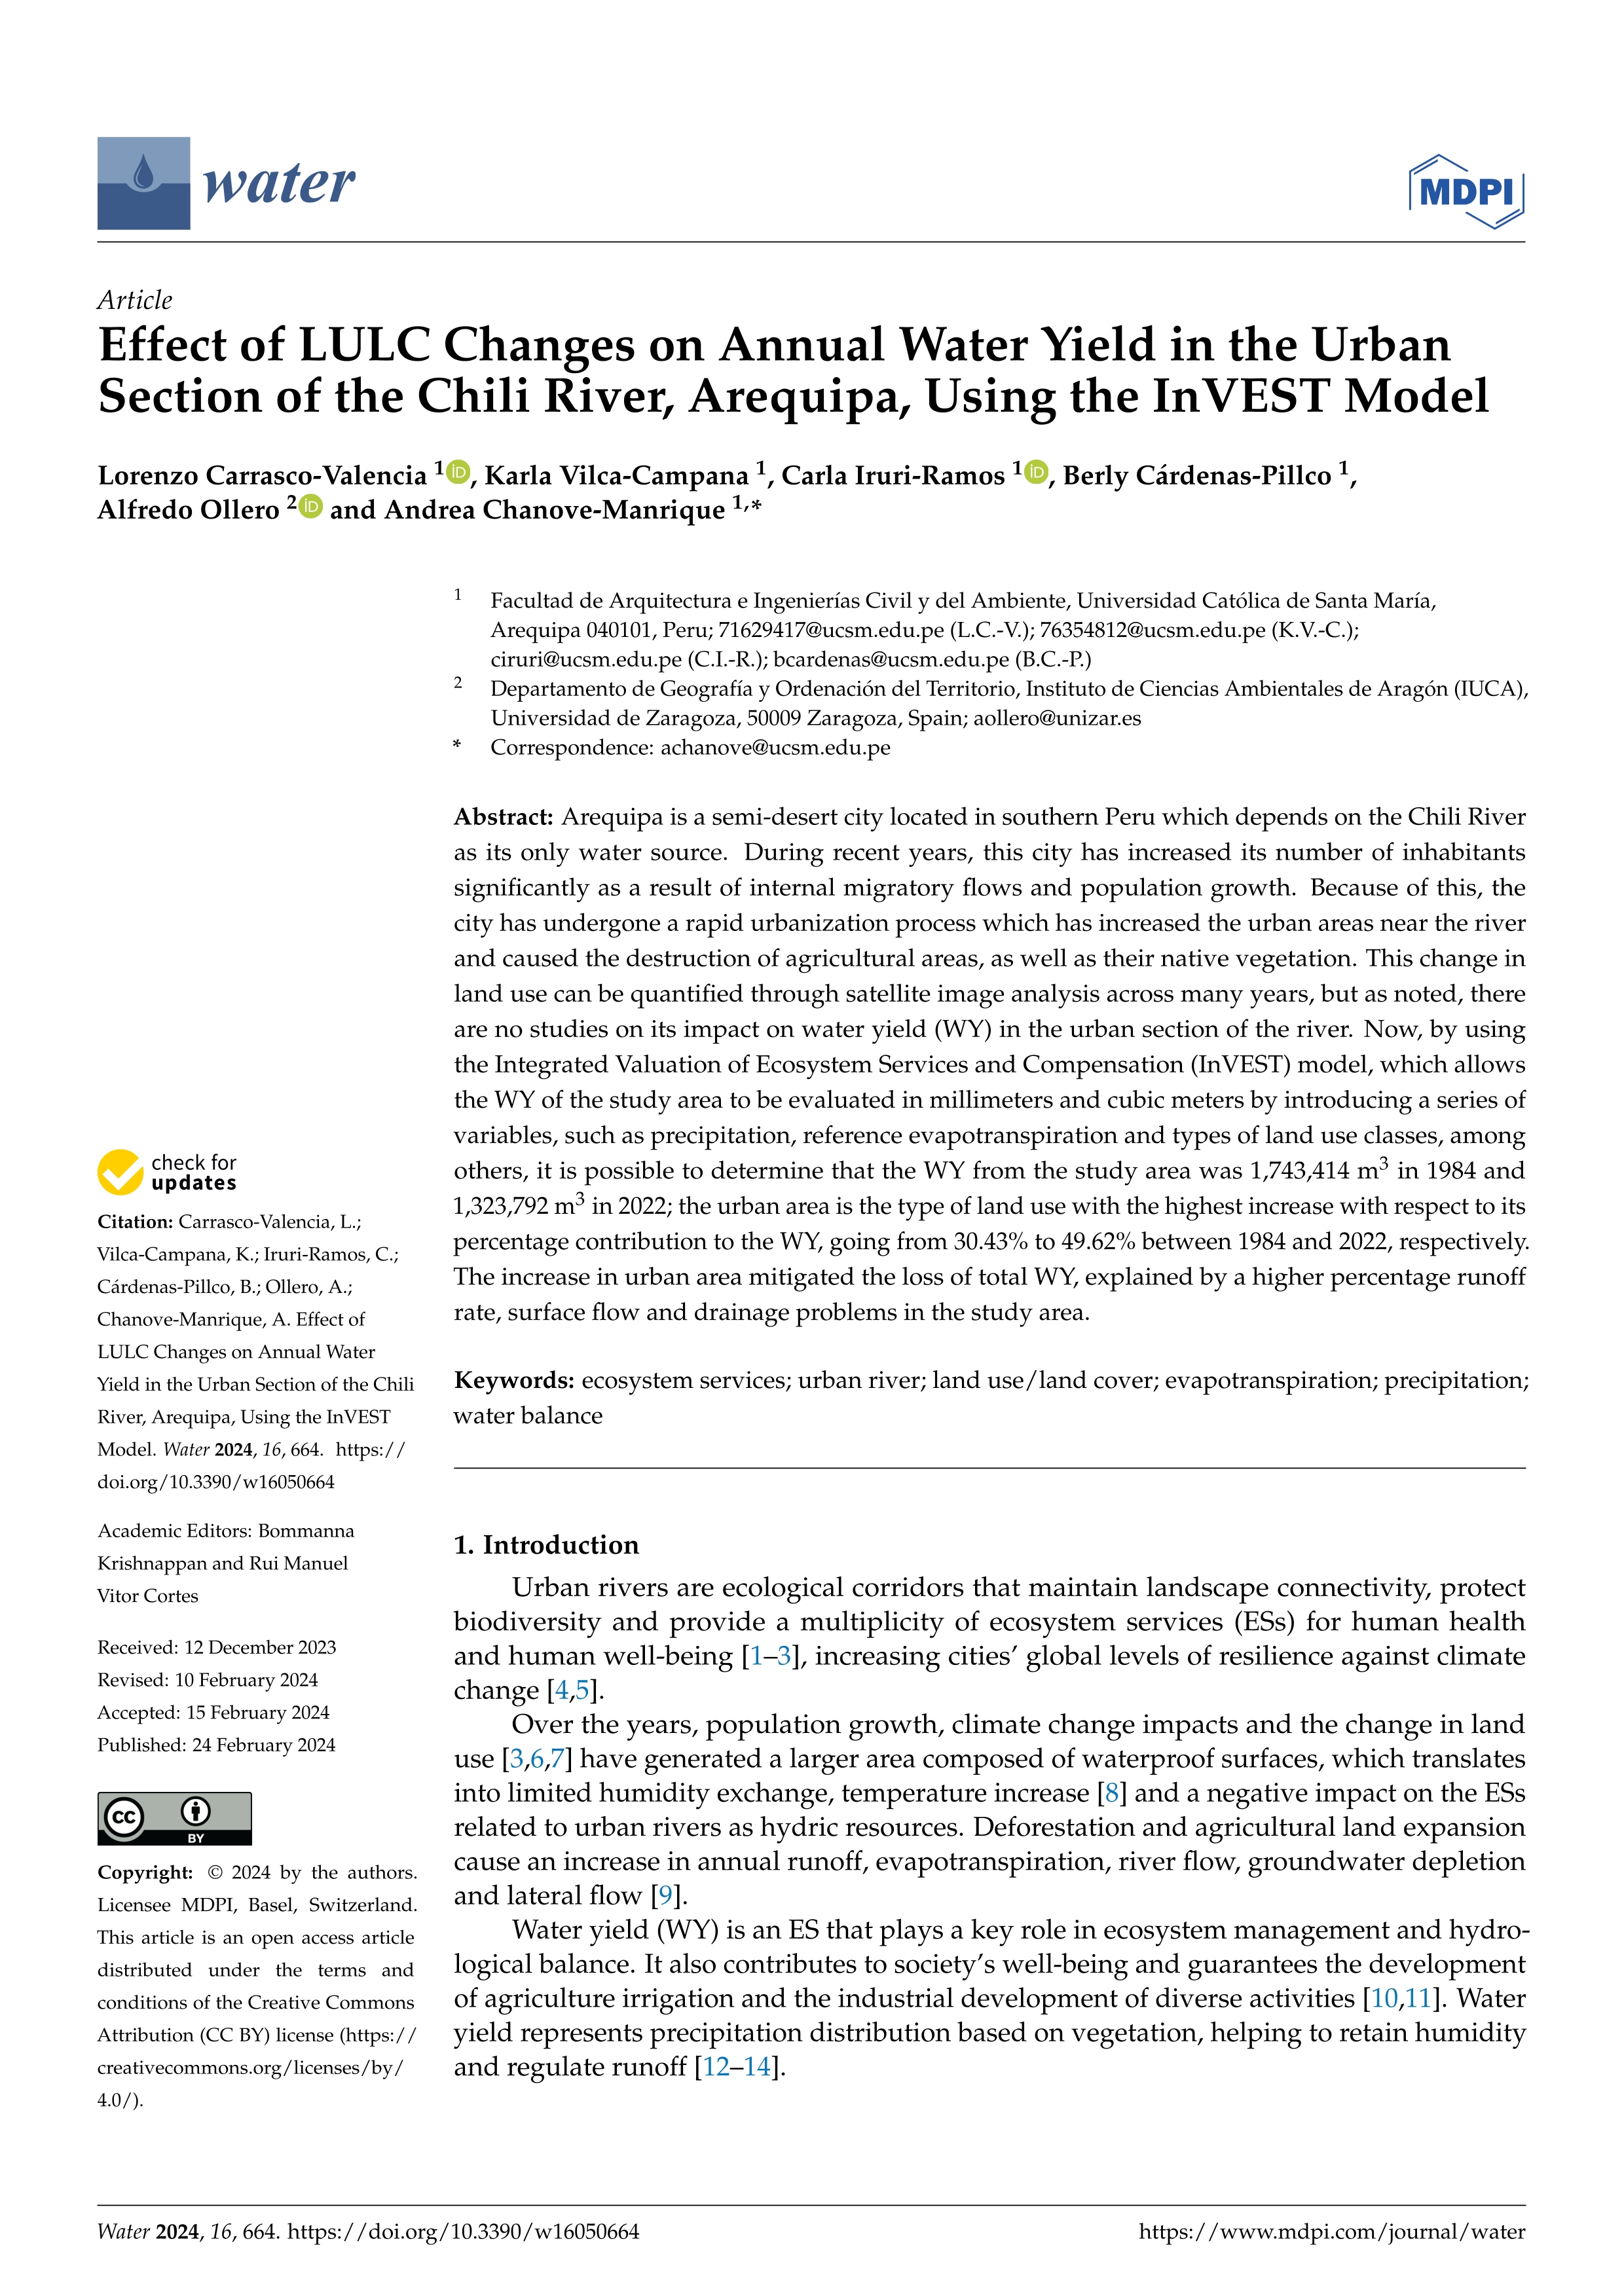 Effect of LULC Changes on Annual Water Yield in the Urban Section of the Chili River, Arequipa, Using the InVEST Model